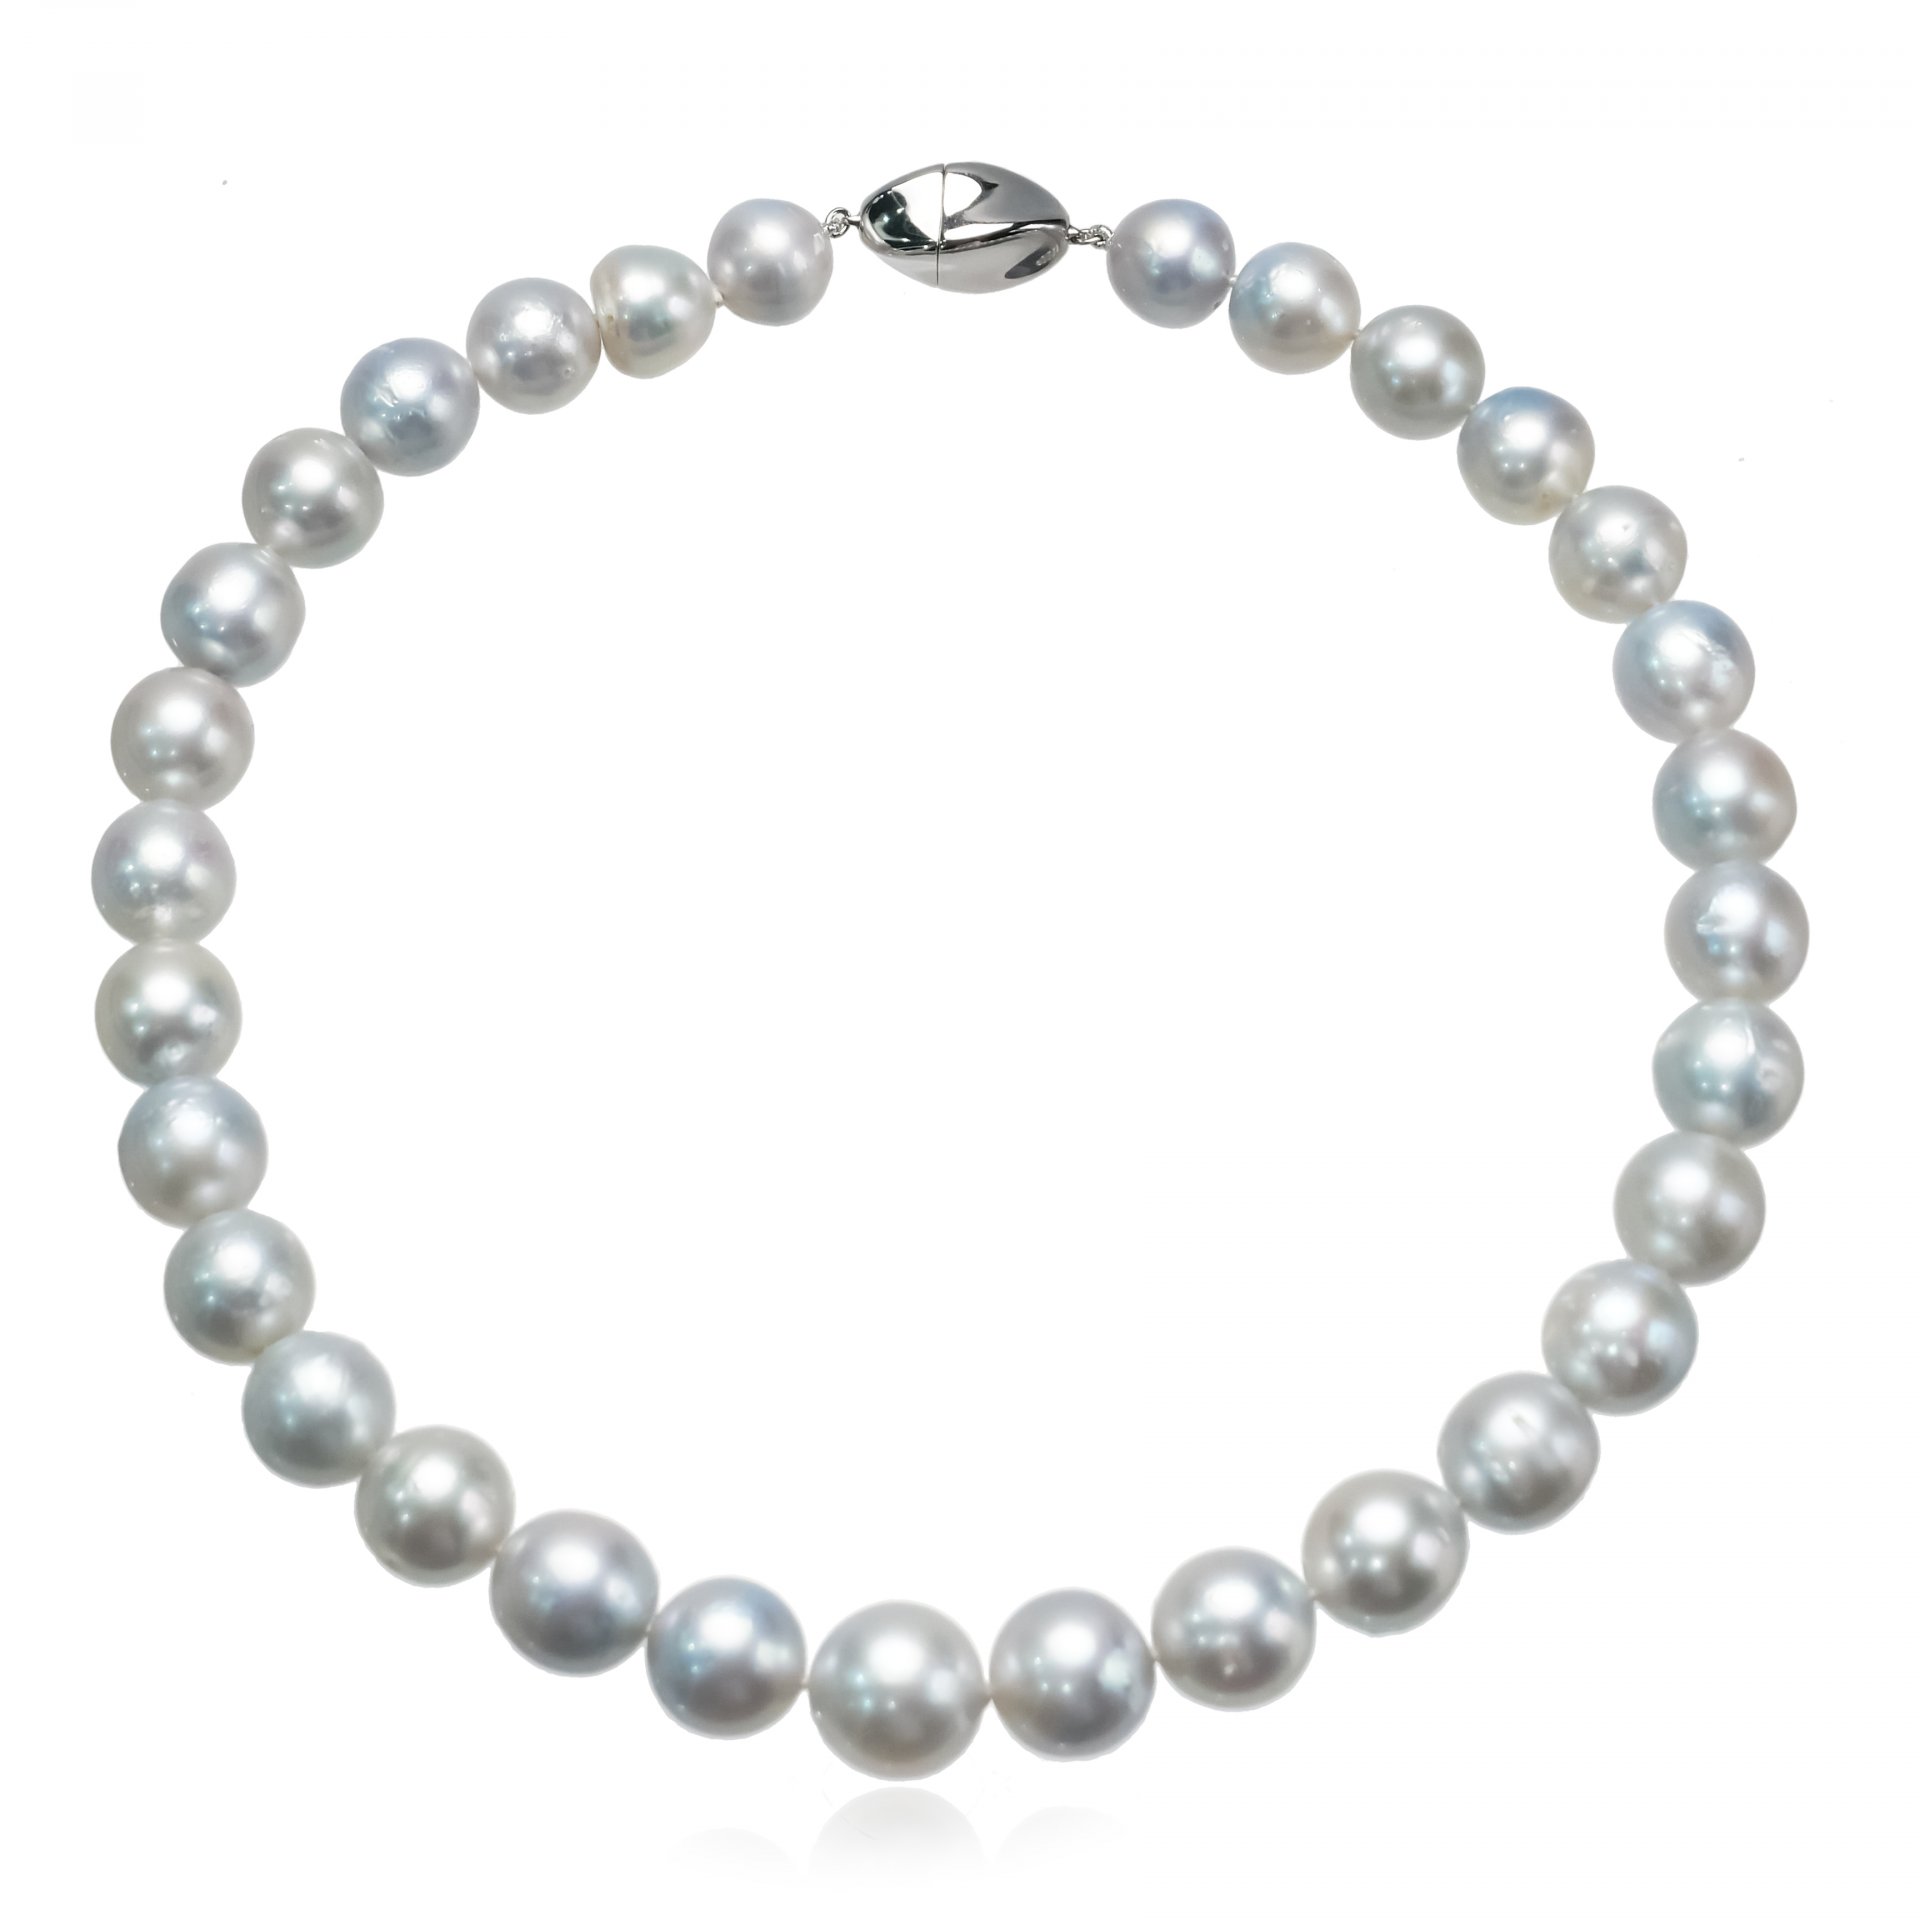 12.0 - 15.4 mm, White South Sea Pearl, Graduated Pearl Necklace